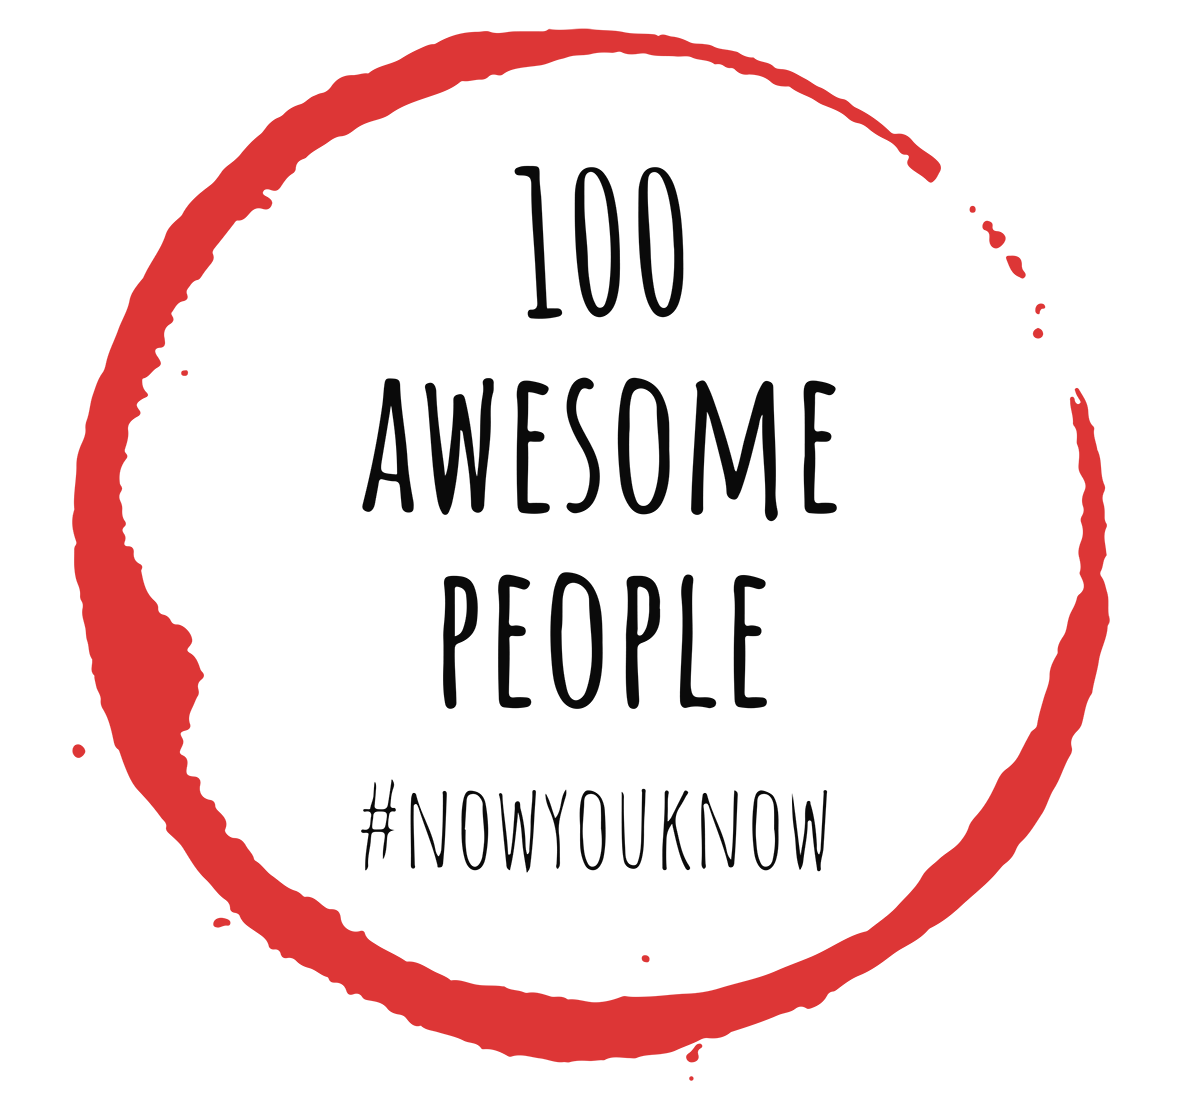 100AwesomePeople